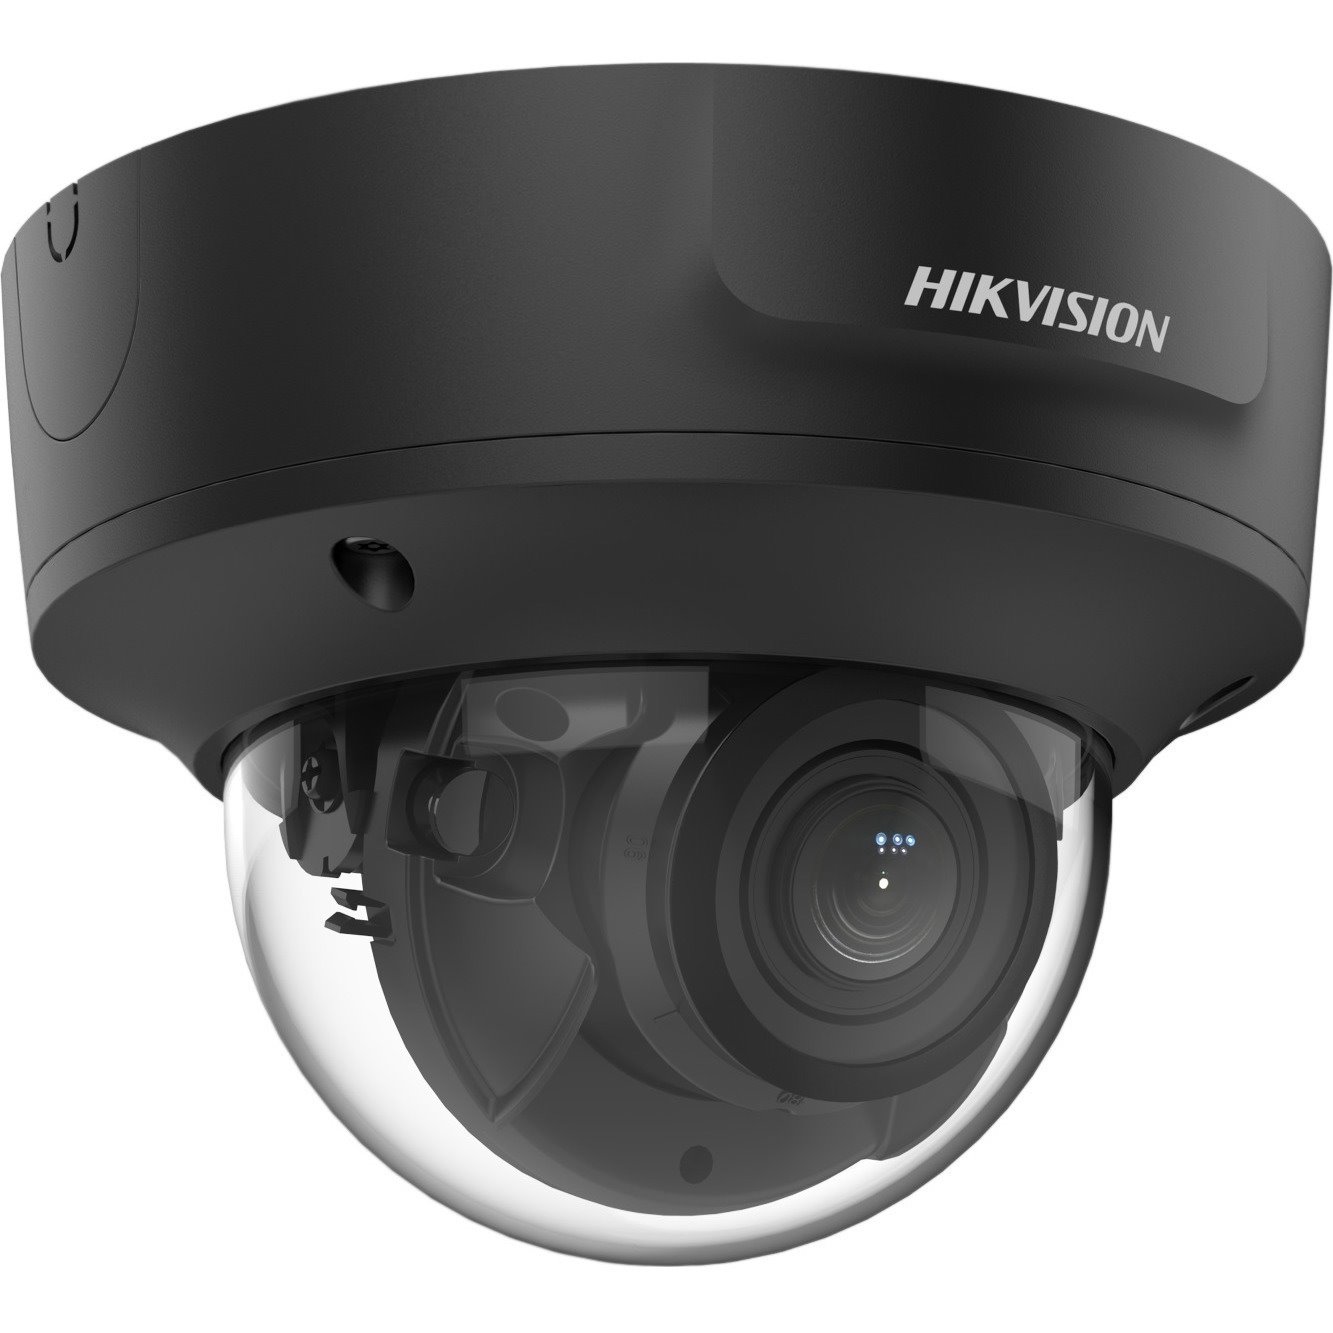 Hikvision EasyIP DS-2CD2743G2-IZS 4 Megapixel HD Network Camera - Color - Dome